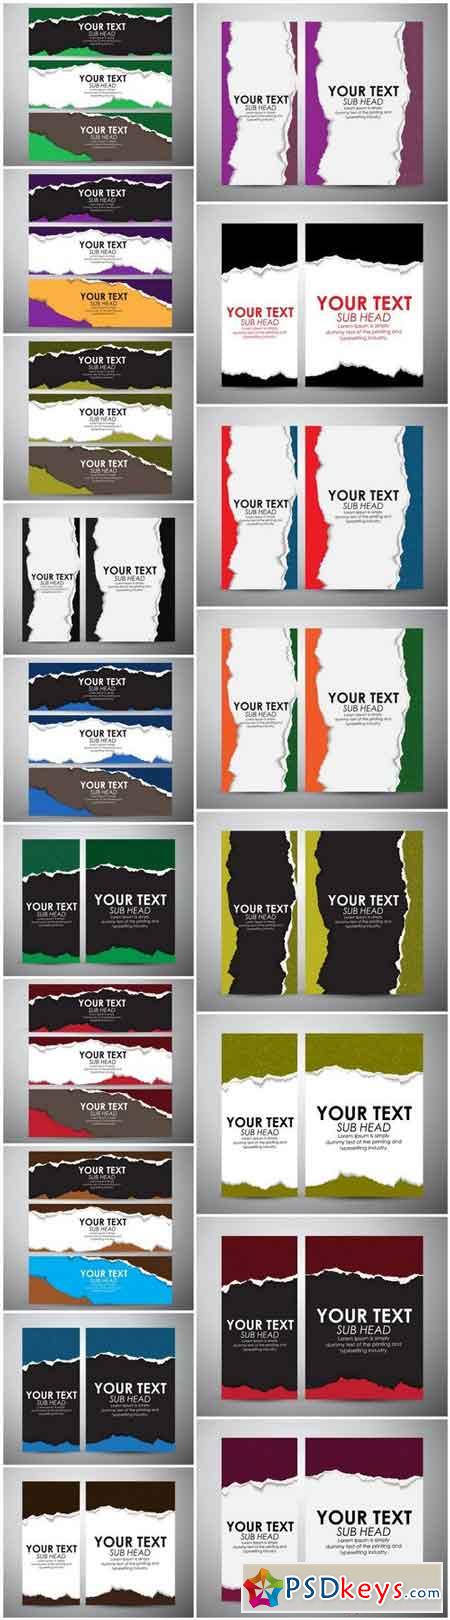 Torn Banners Background - 20 Vector